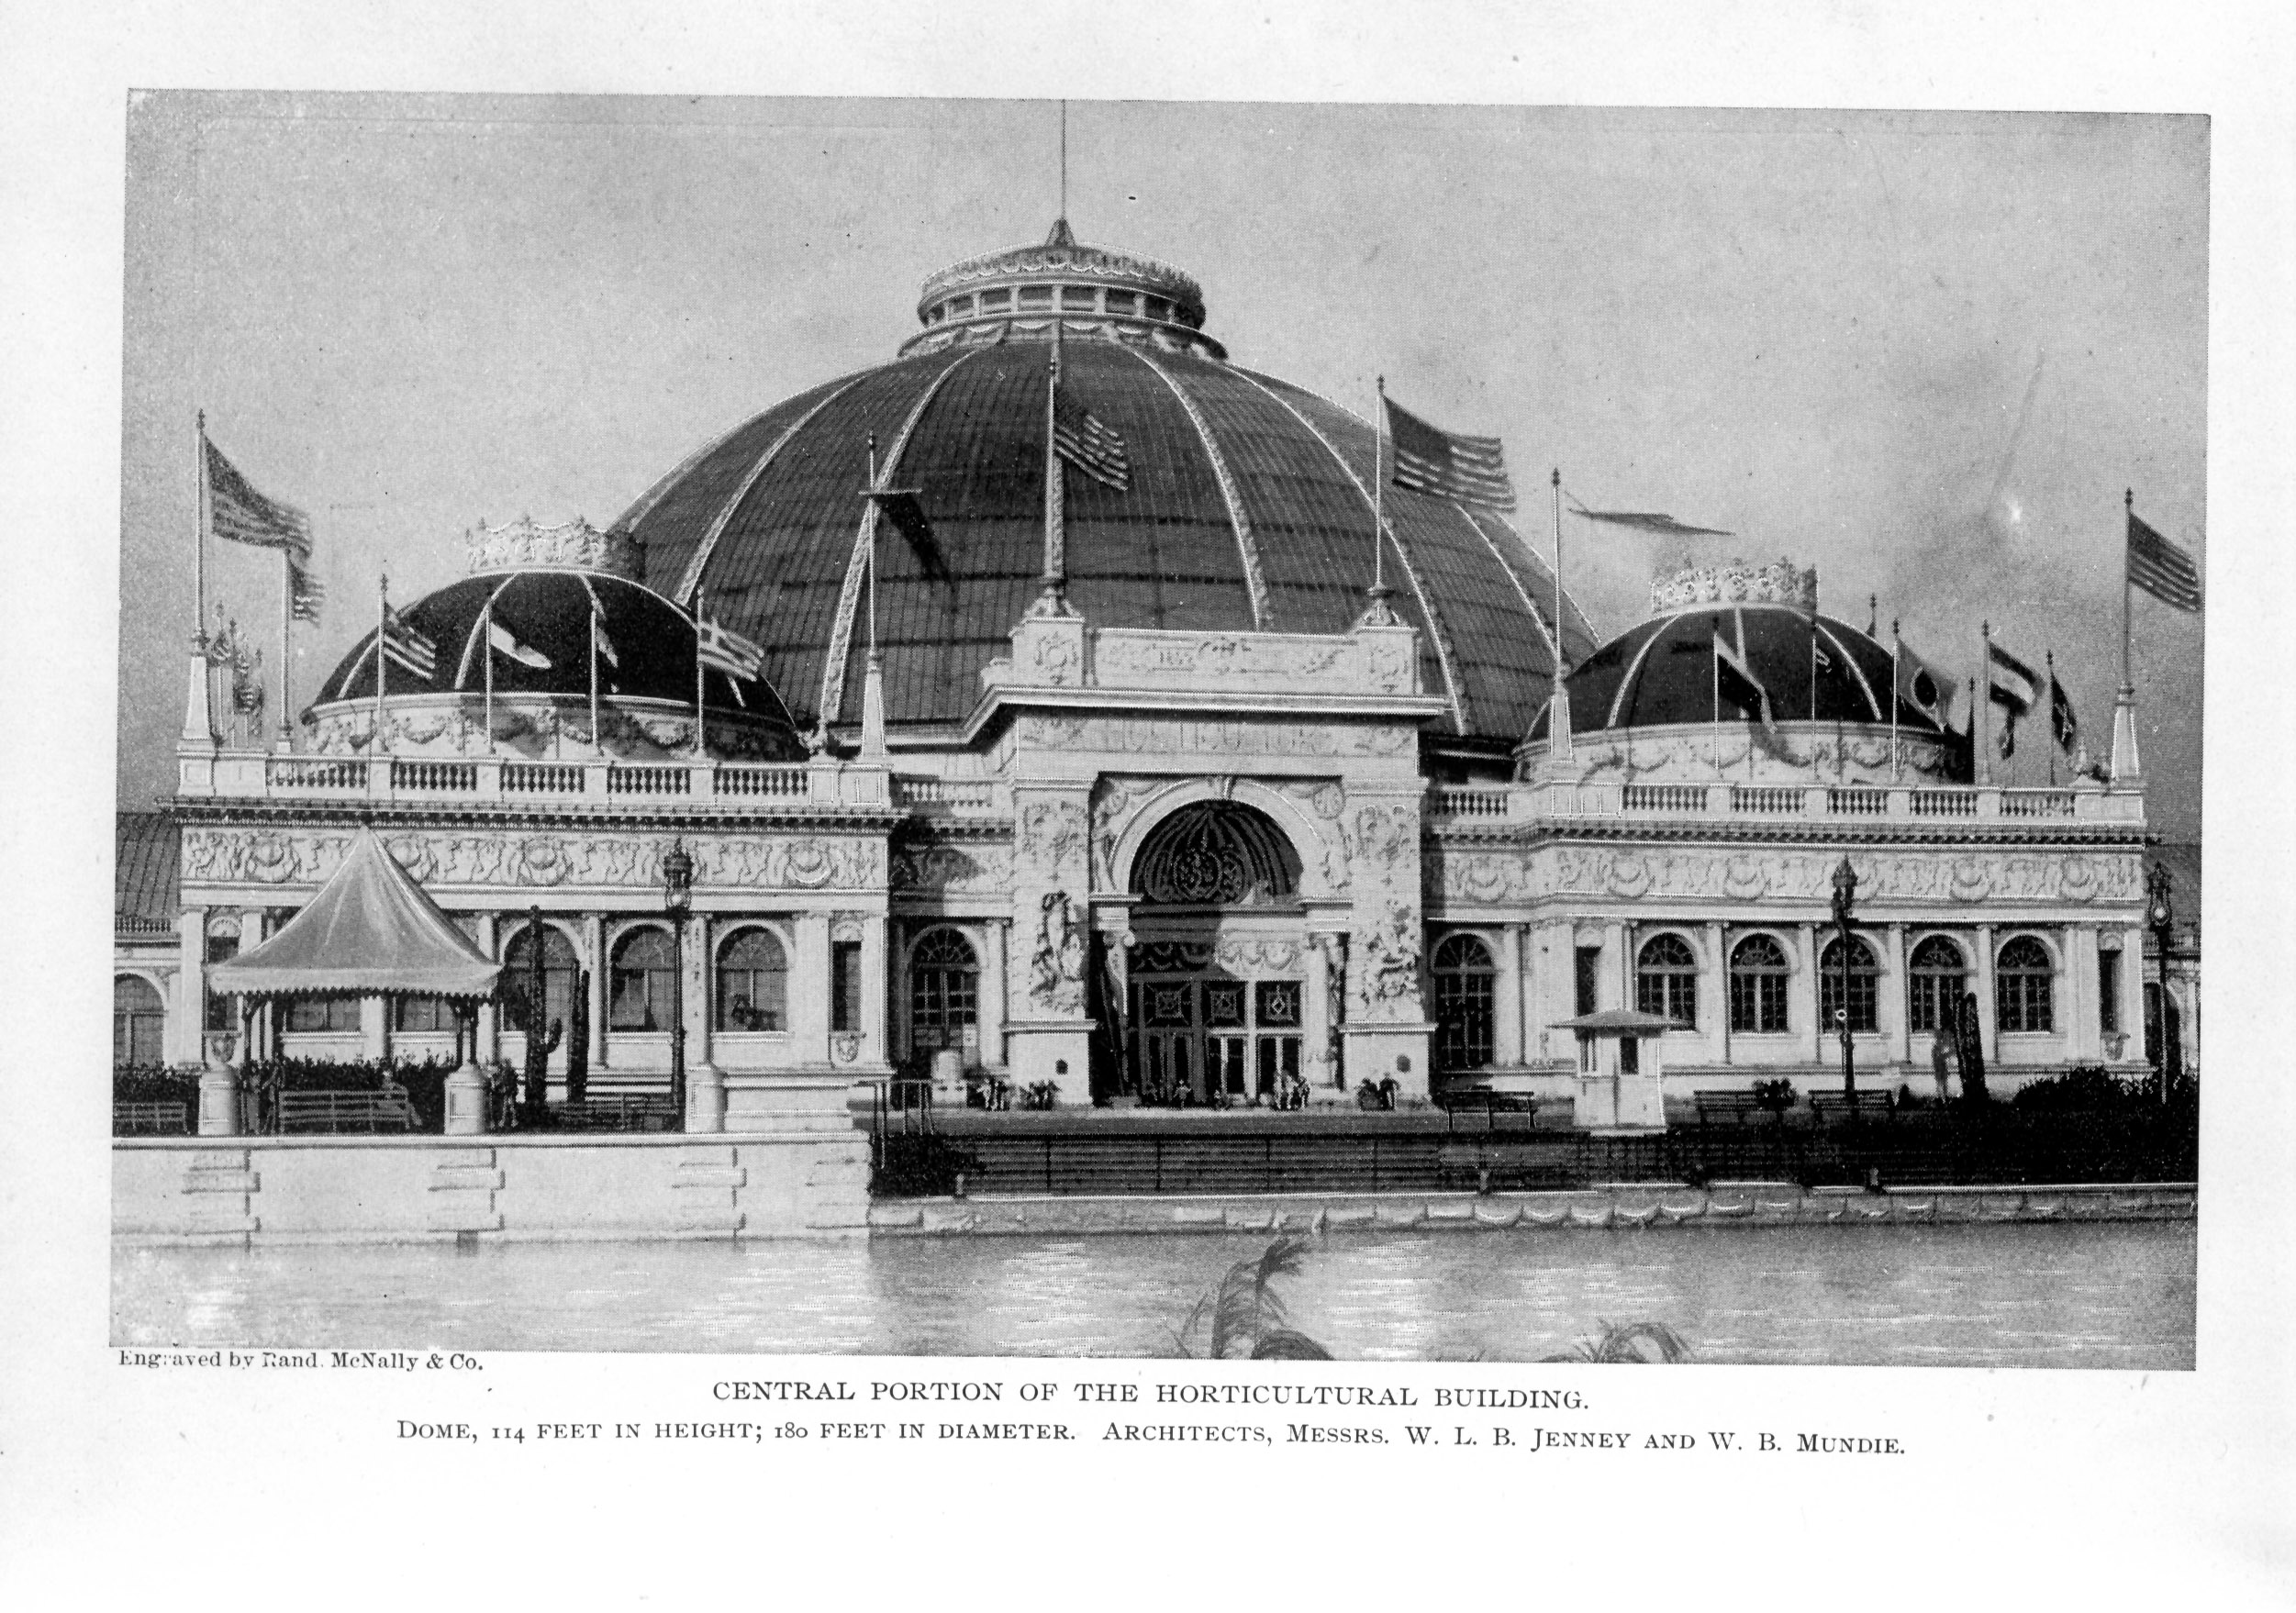 large ornate building with massive domed roof